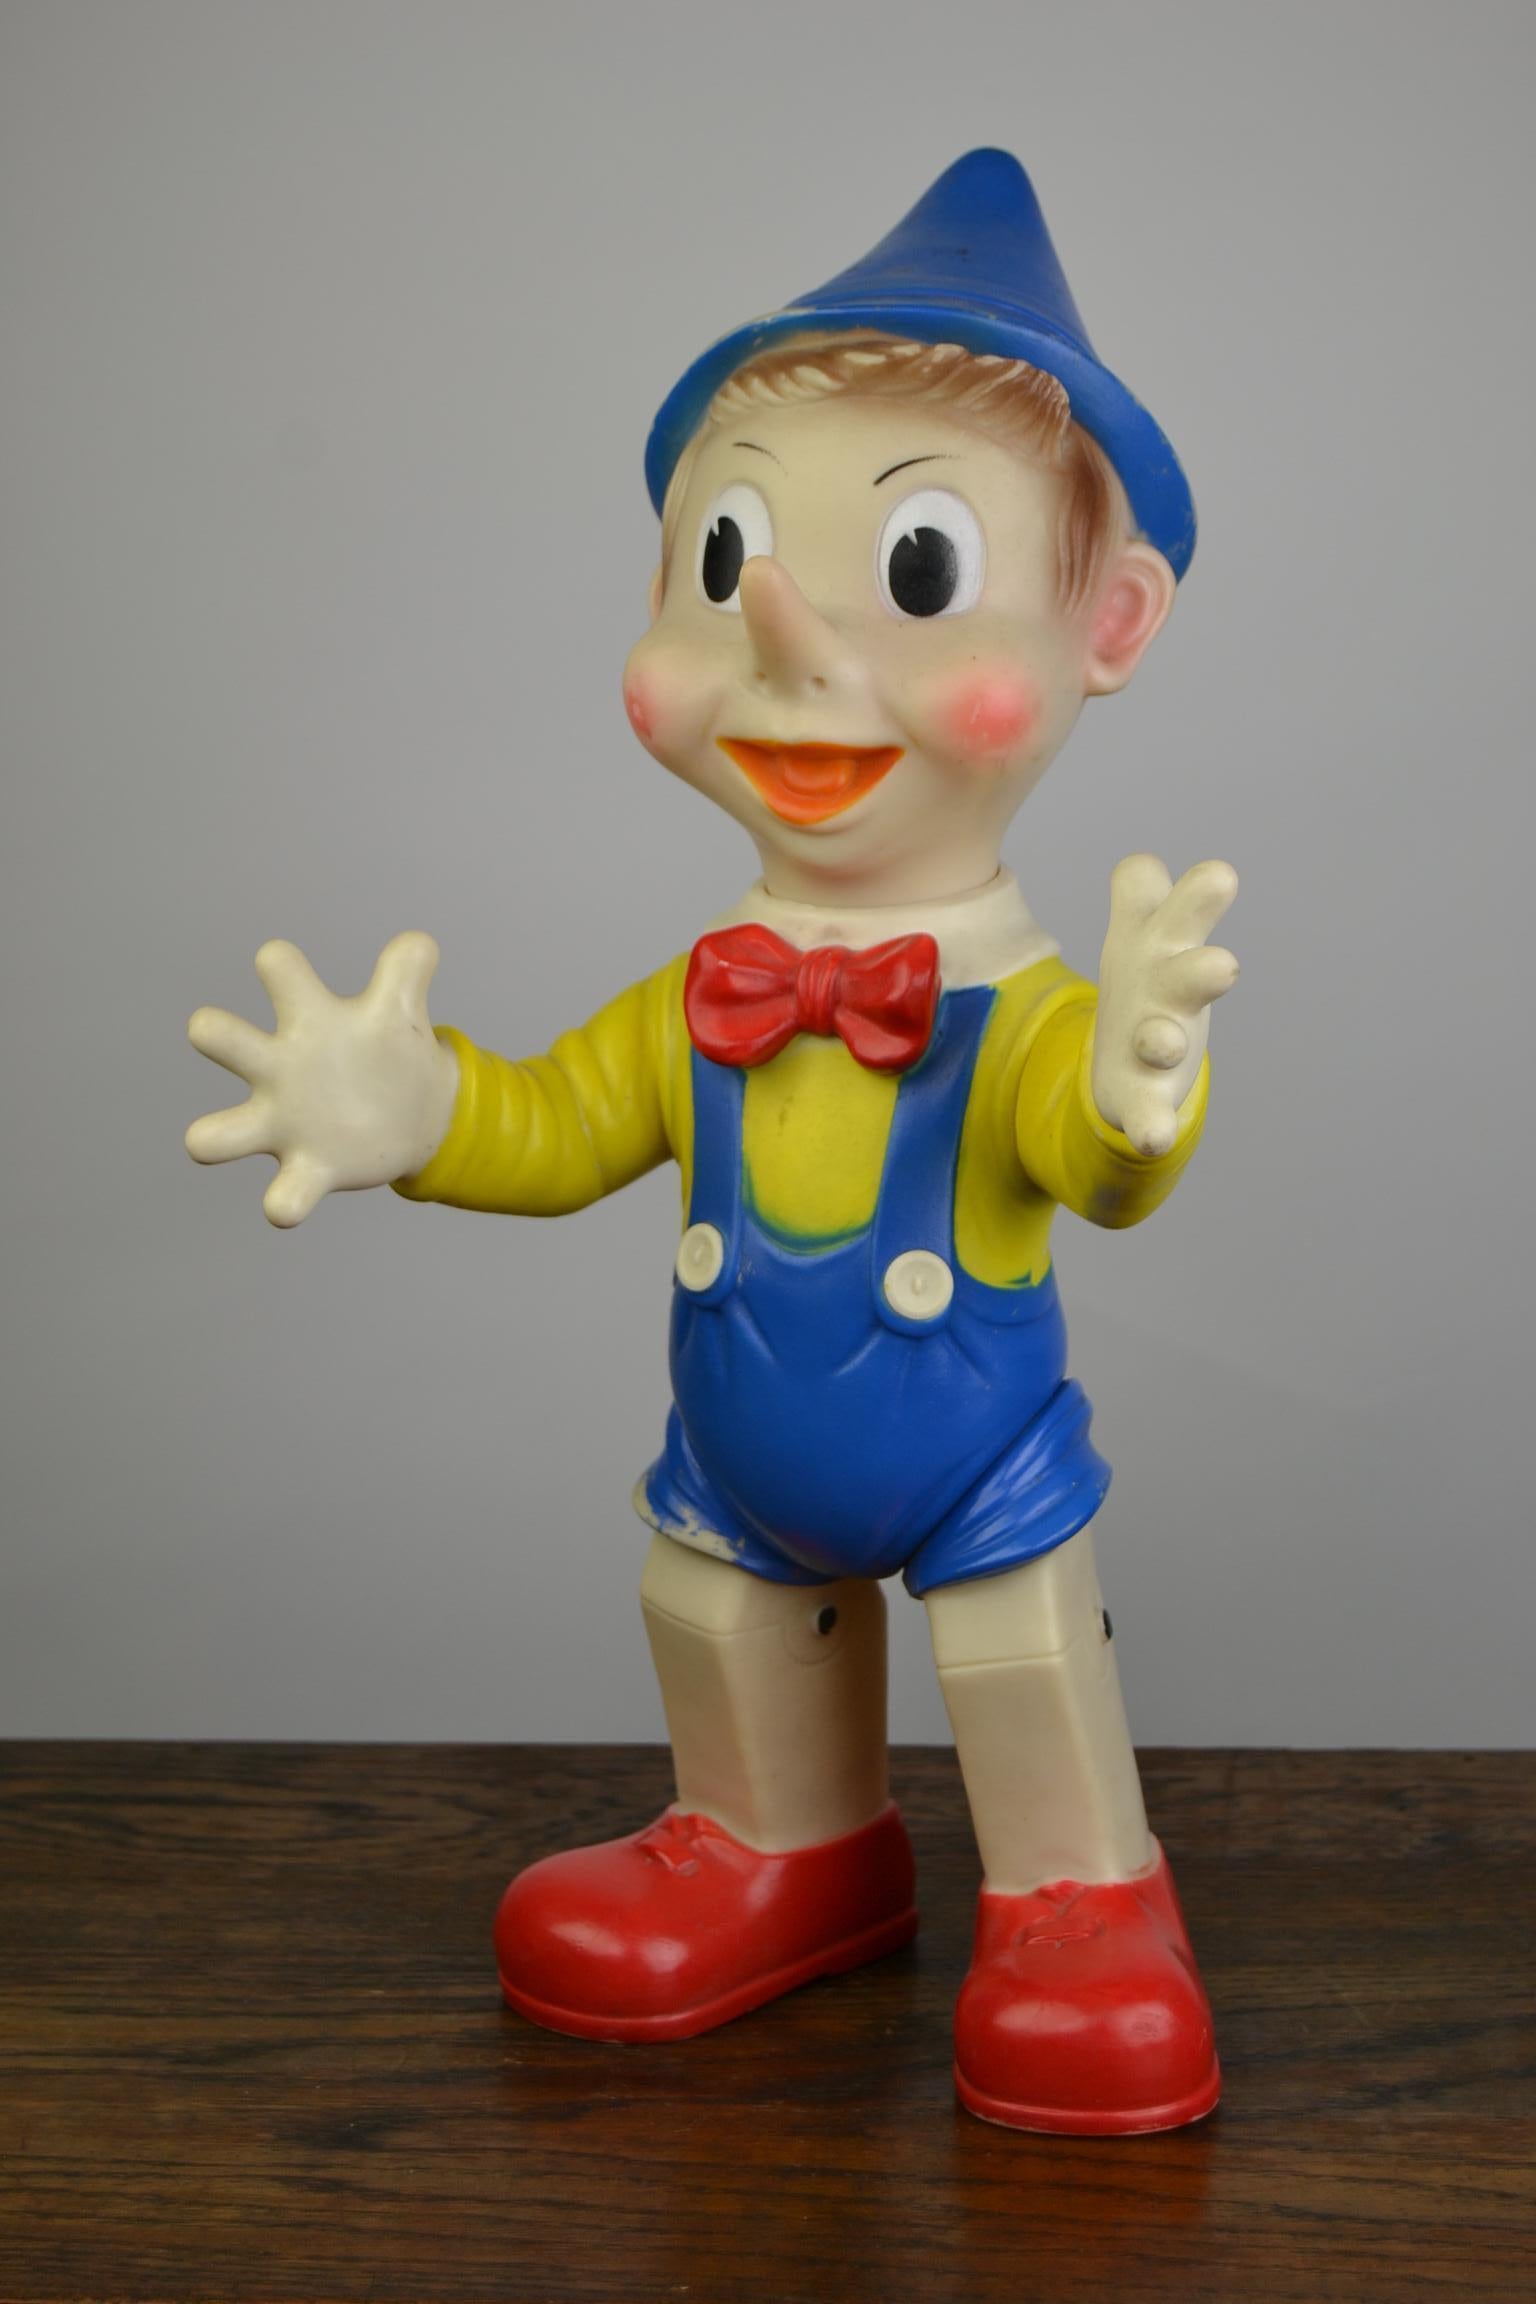 Large Rubber Squeaky Toy Pinocchio by Ledraplastci Italy. 
This 1960s Nostalgic Toy  has a movable head, arms and legs and his beeper still works. It's a large sized rubber squeak toy : 16.14 inch- 41 cm heigh ! 
This Toy Doll has the colors yellow,